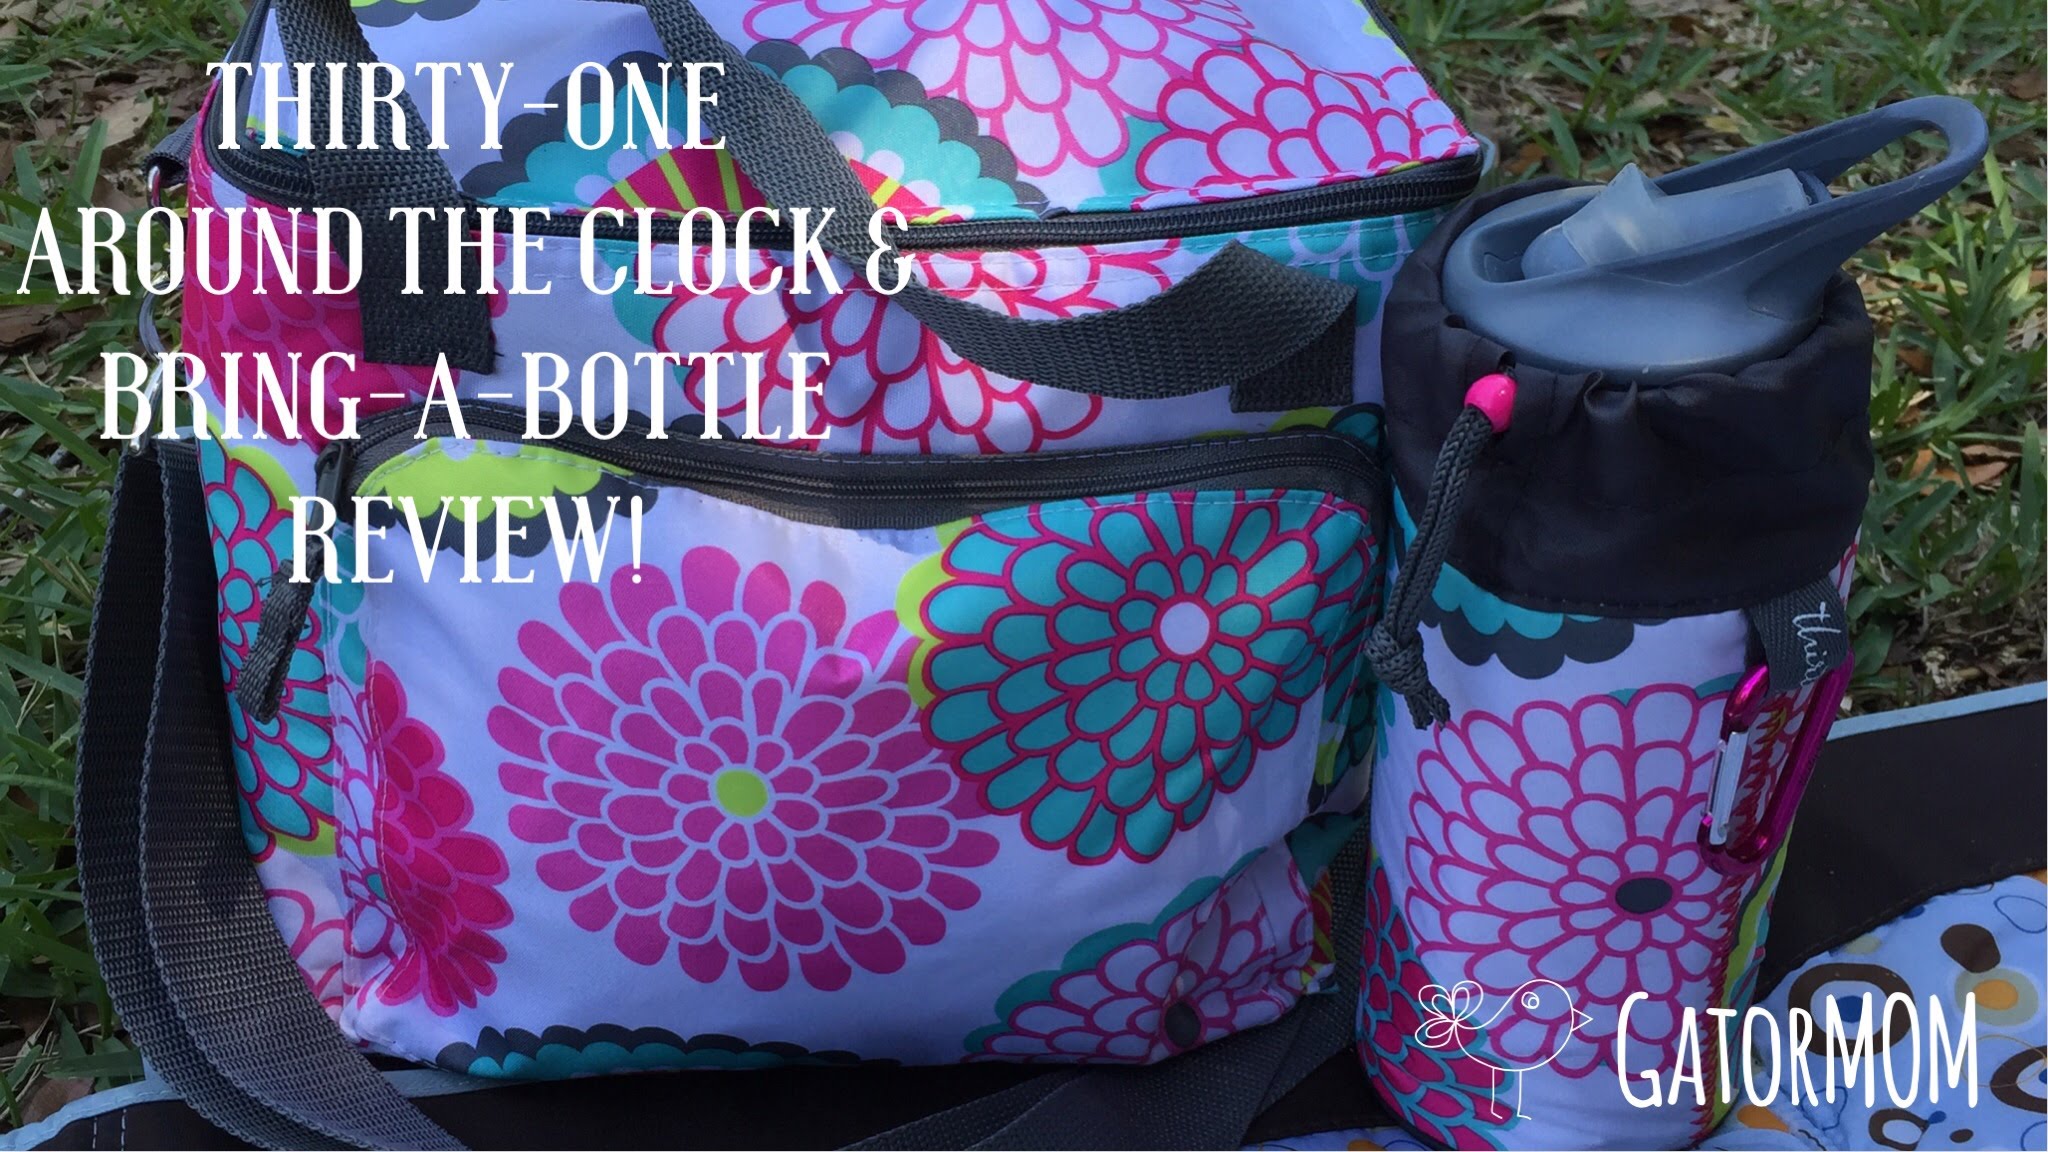 Around the Clock & Bring-A-Bottle Thermal reviews!